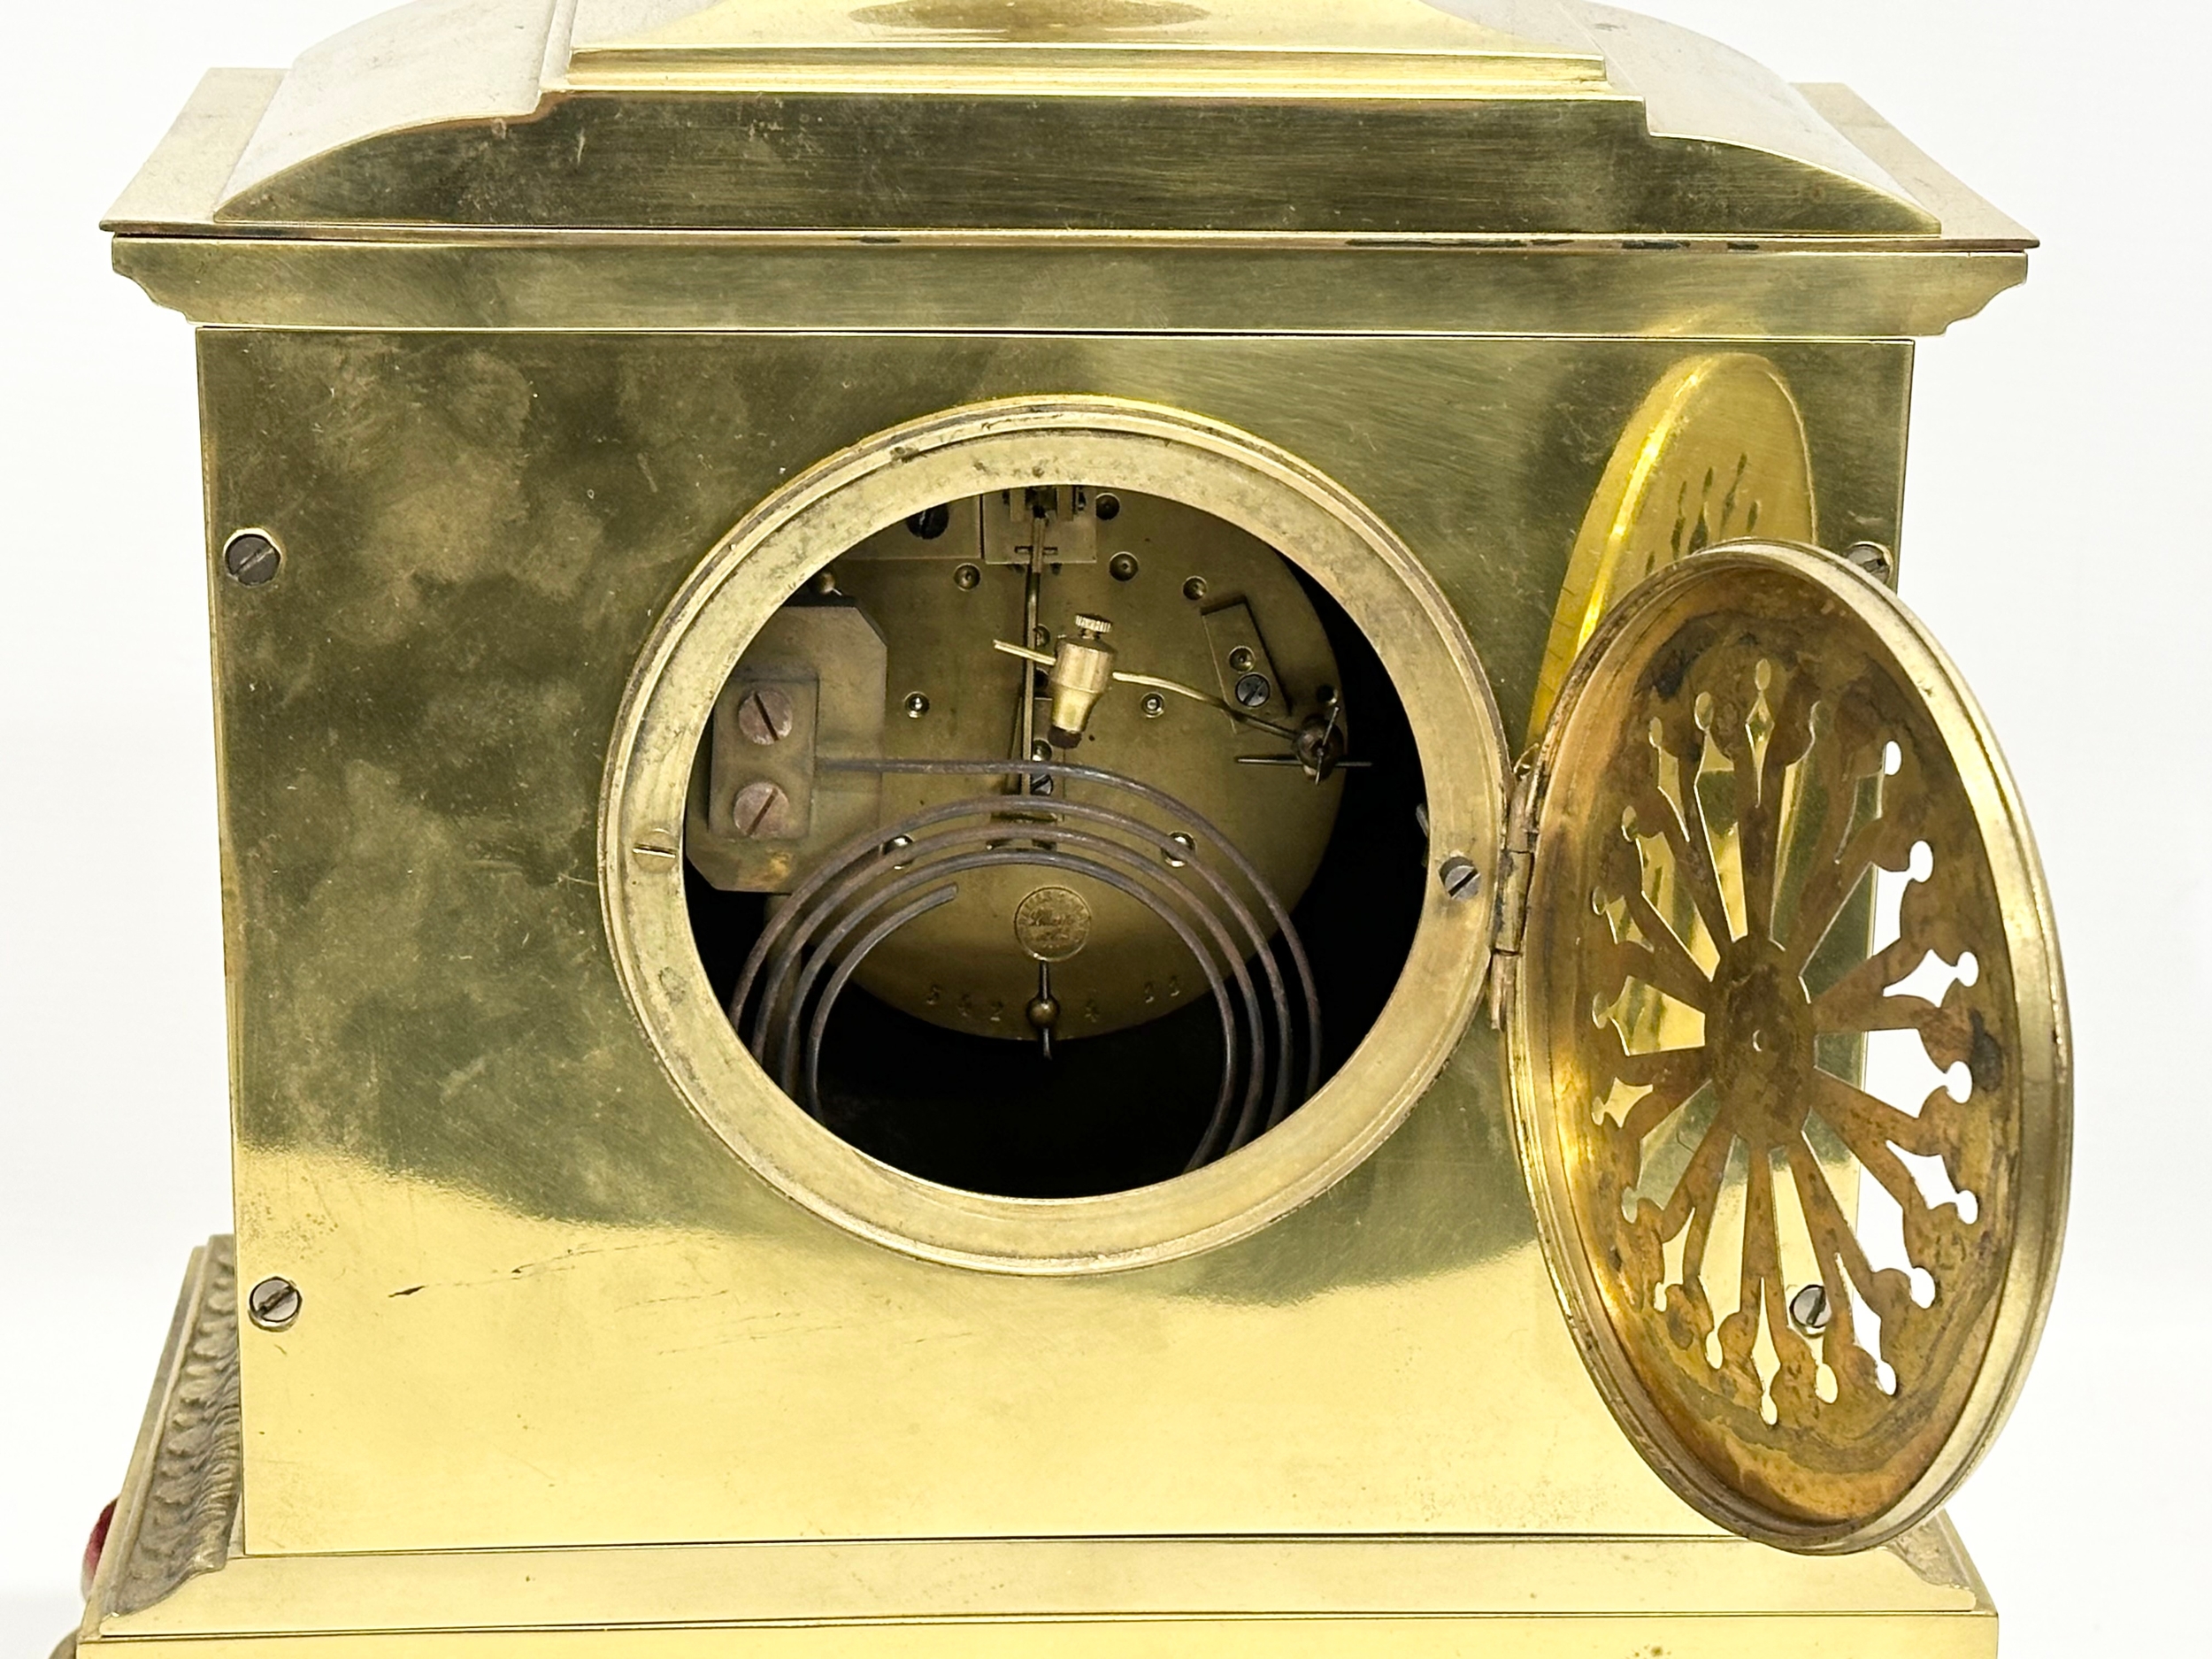 A late 19th century French brass mantle clock on stand. L. Marti Medaille D’Argent 1889. With key - Image 8 of 9